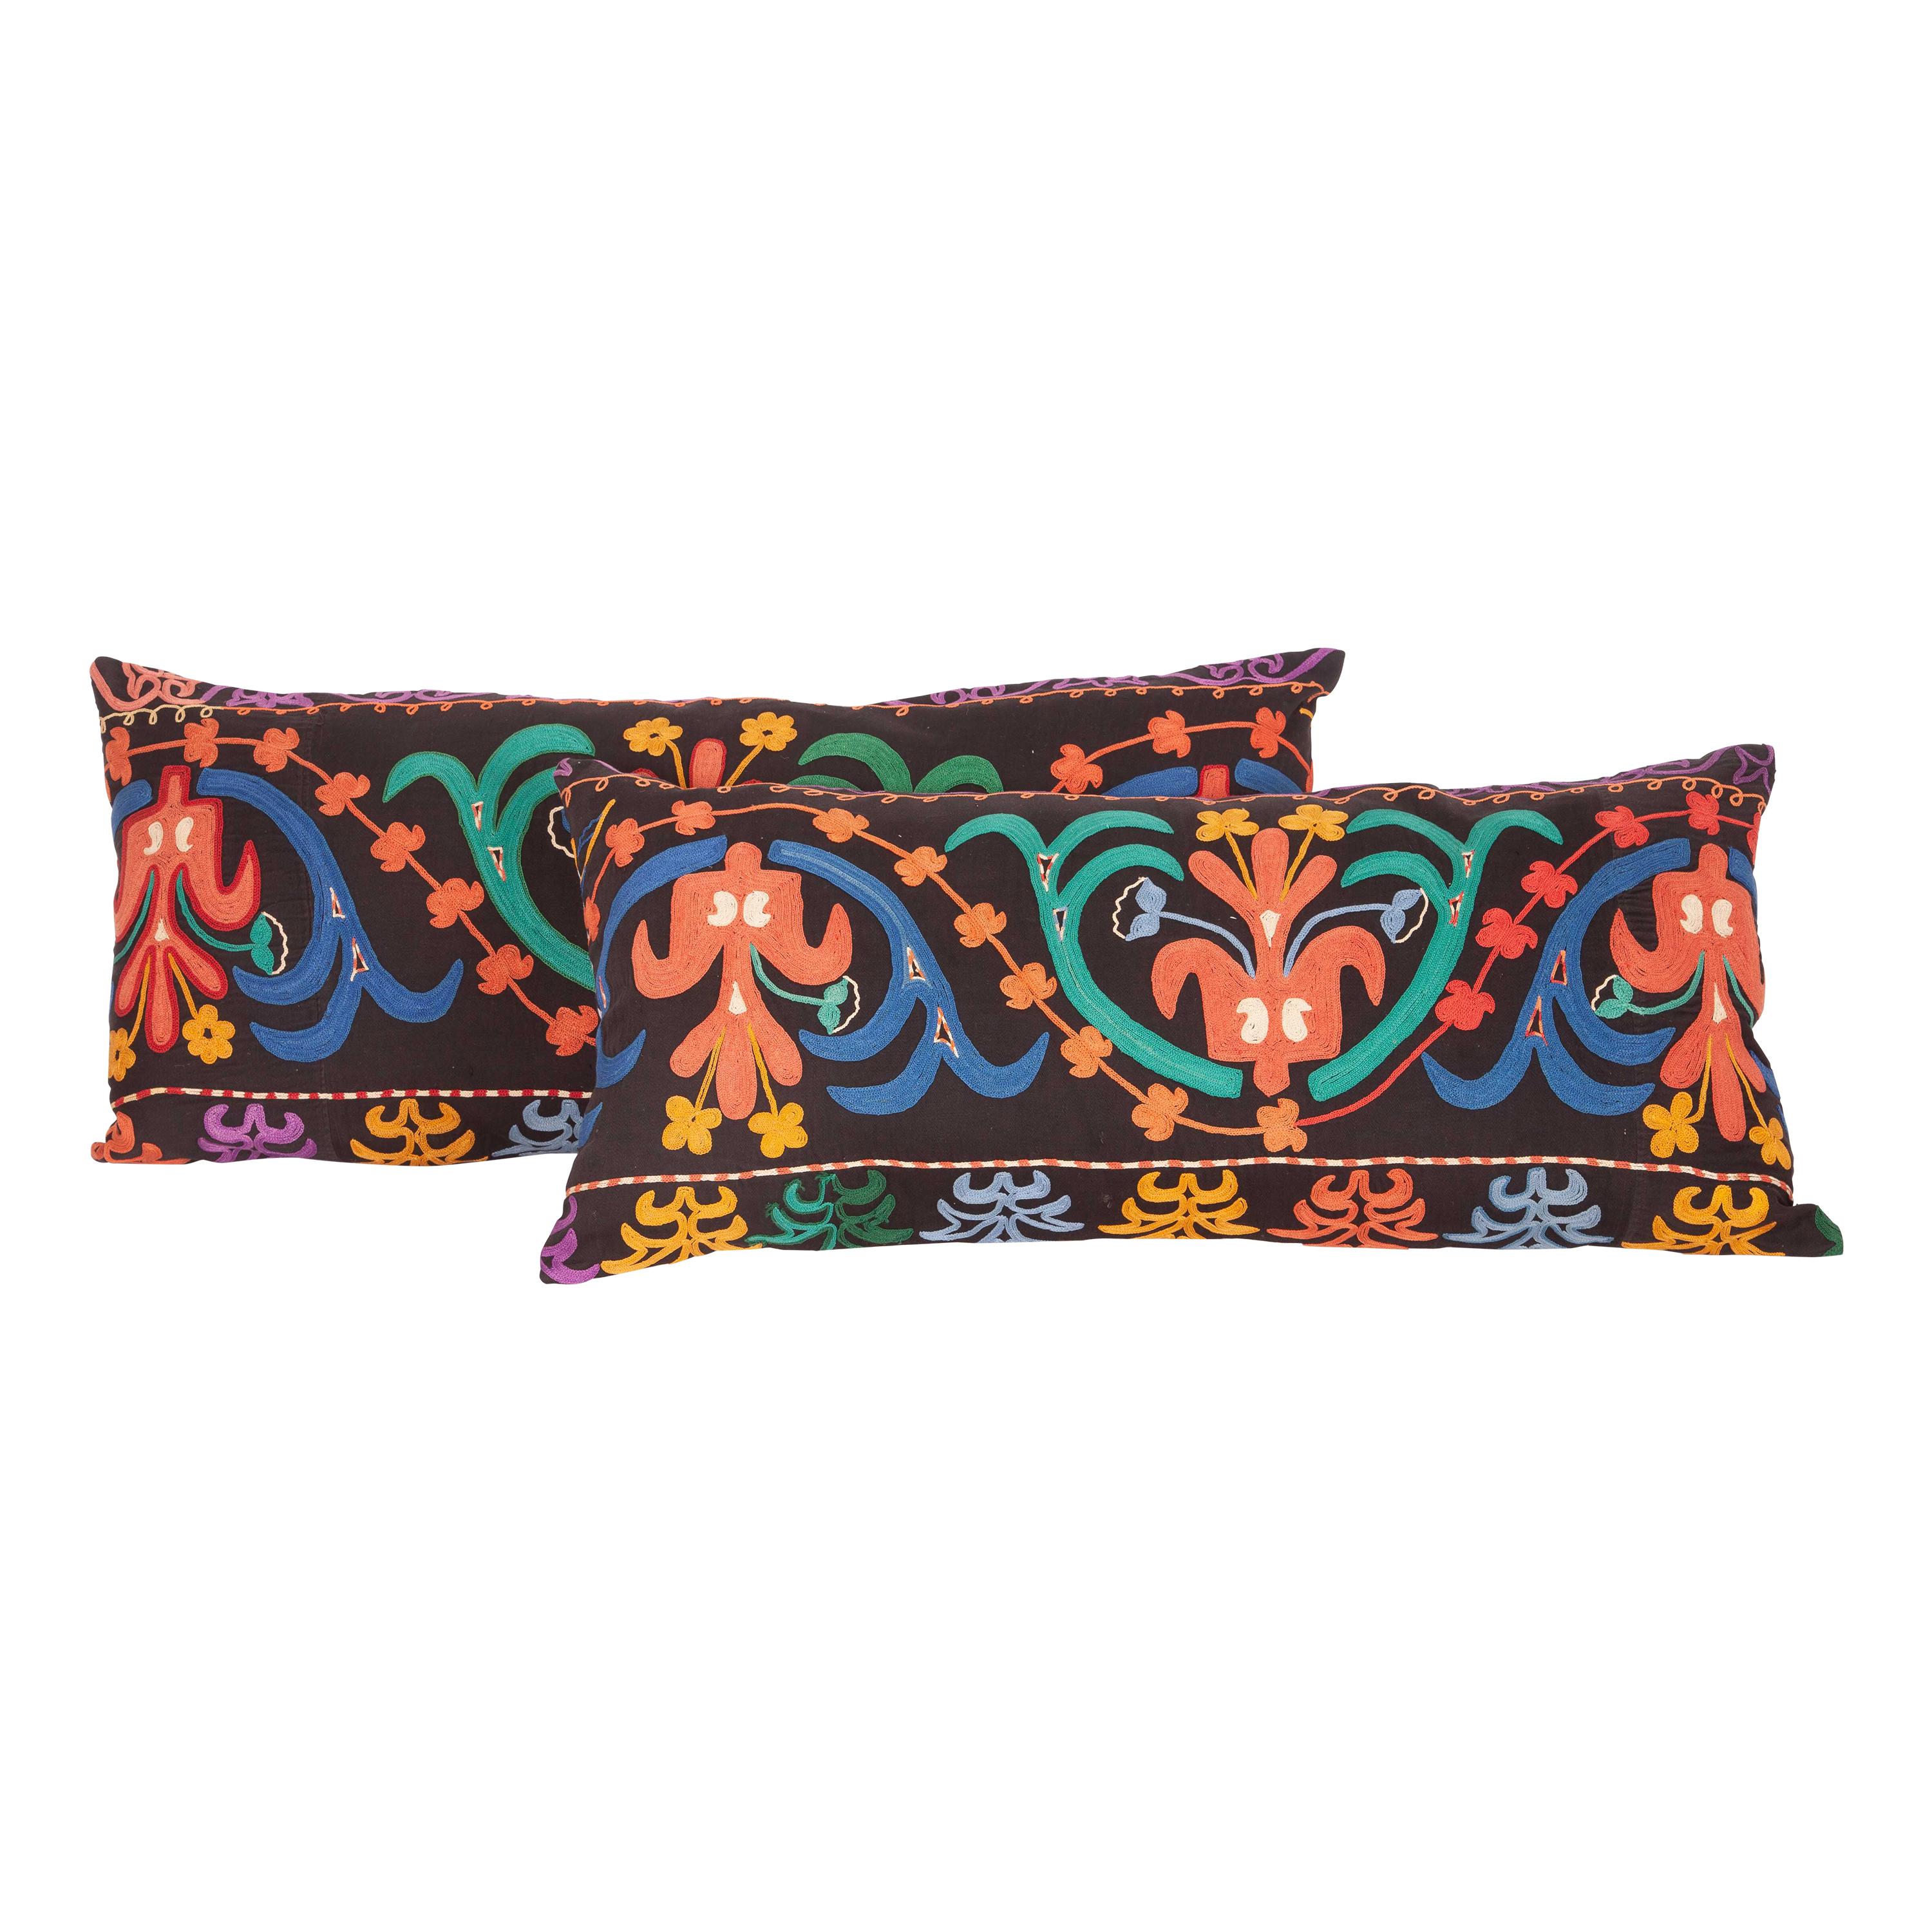 Kyrgyz Lumbar Pillow Cases Made from a Mid-20th Century Kyrgyz Embroidery